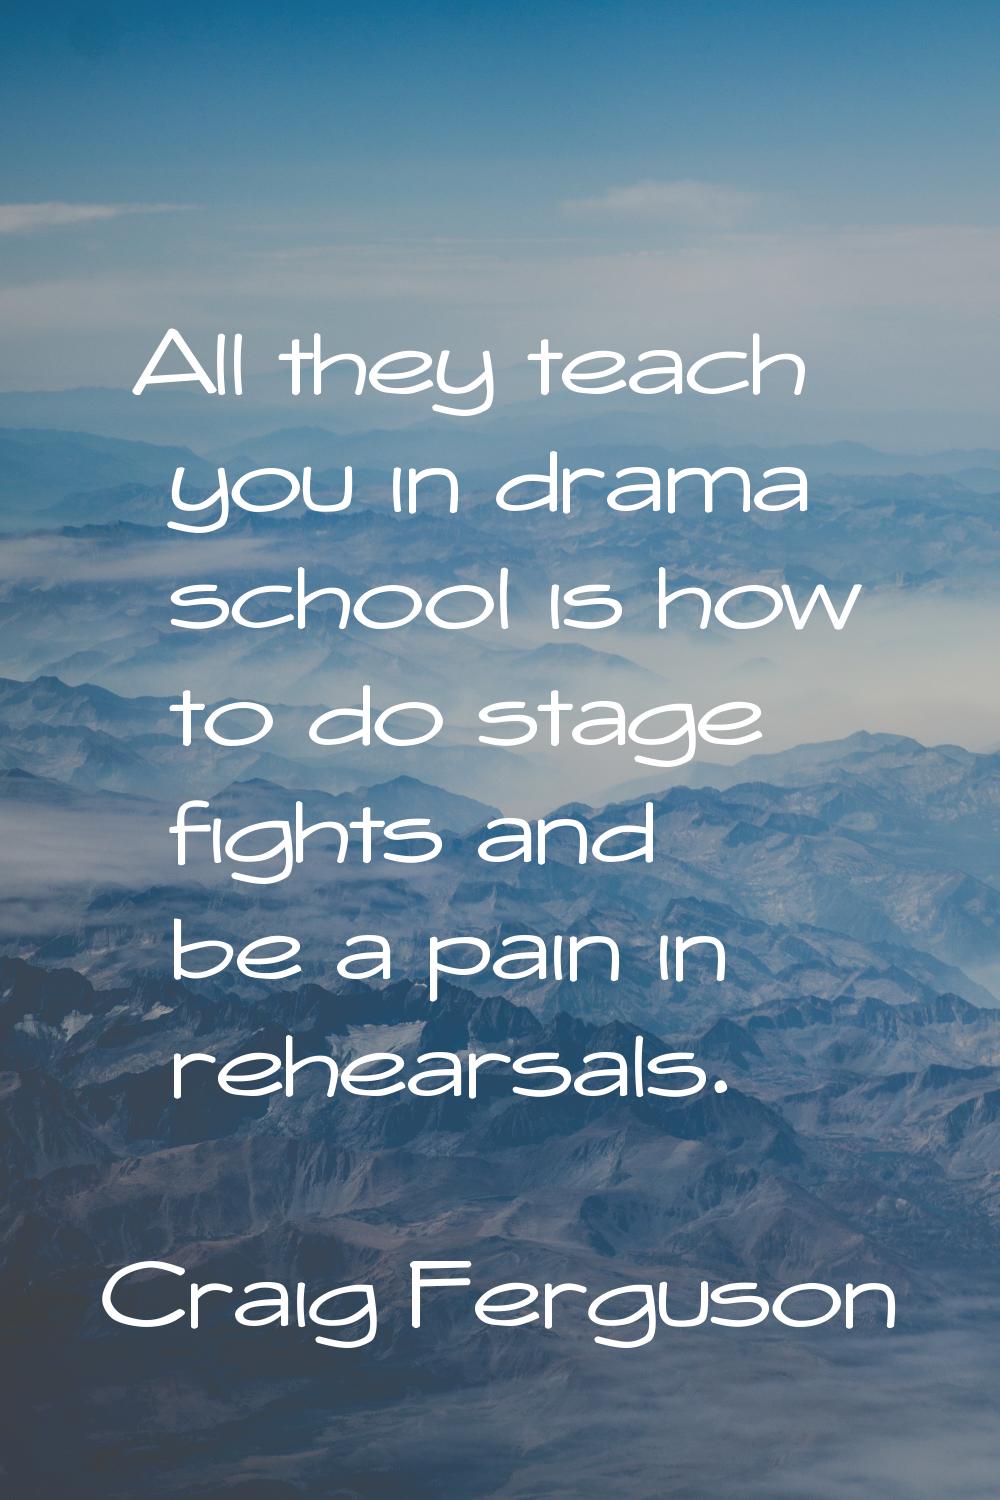 All they teach you in drama school is how to do stage fights and be a pain in rehearsals.